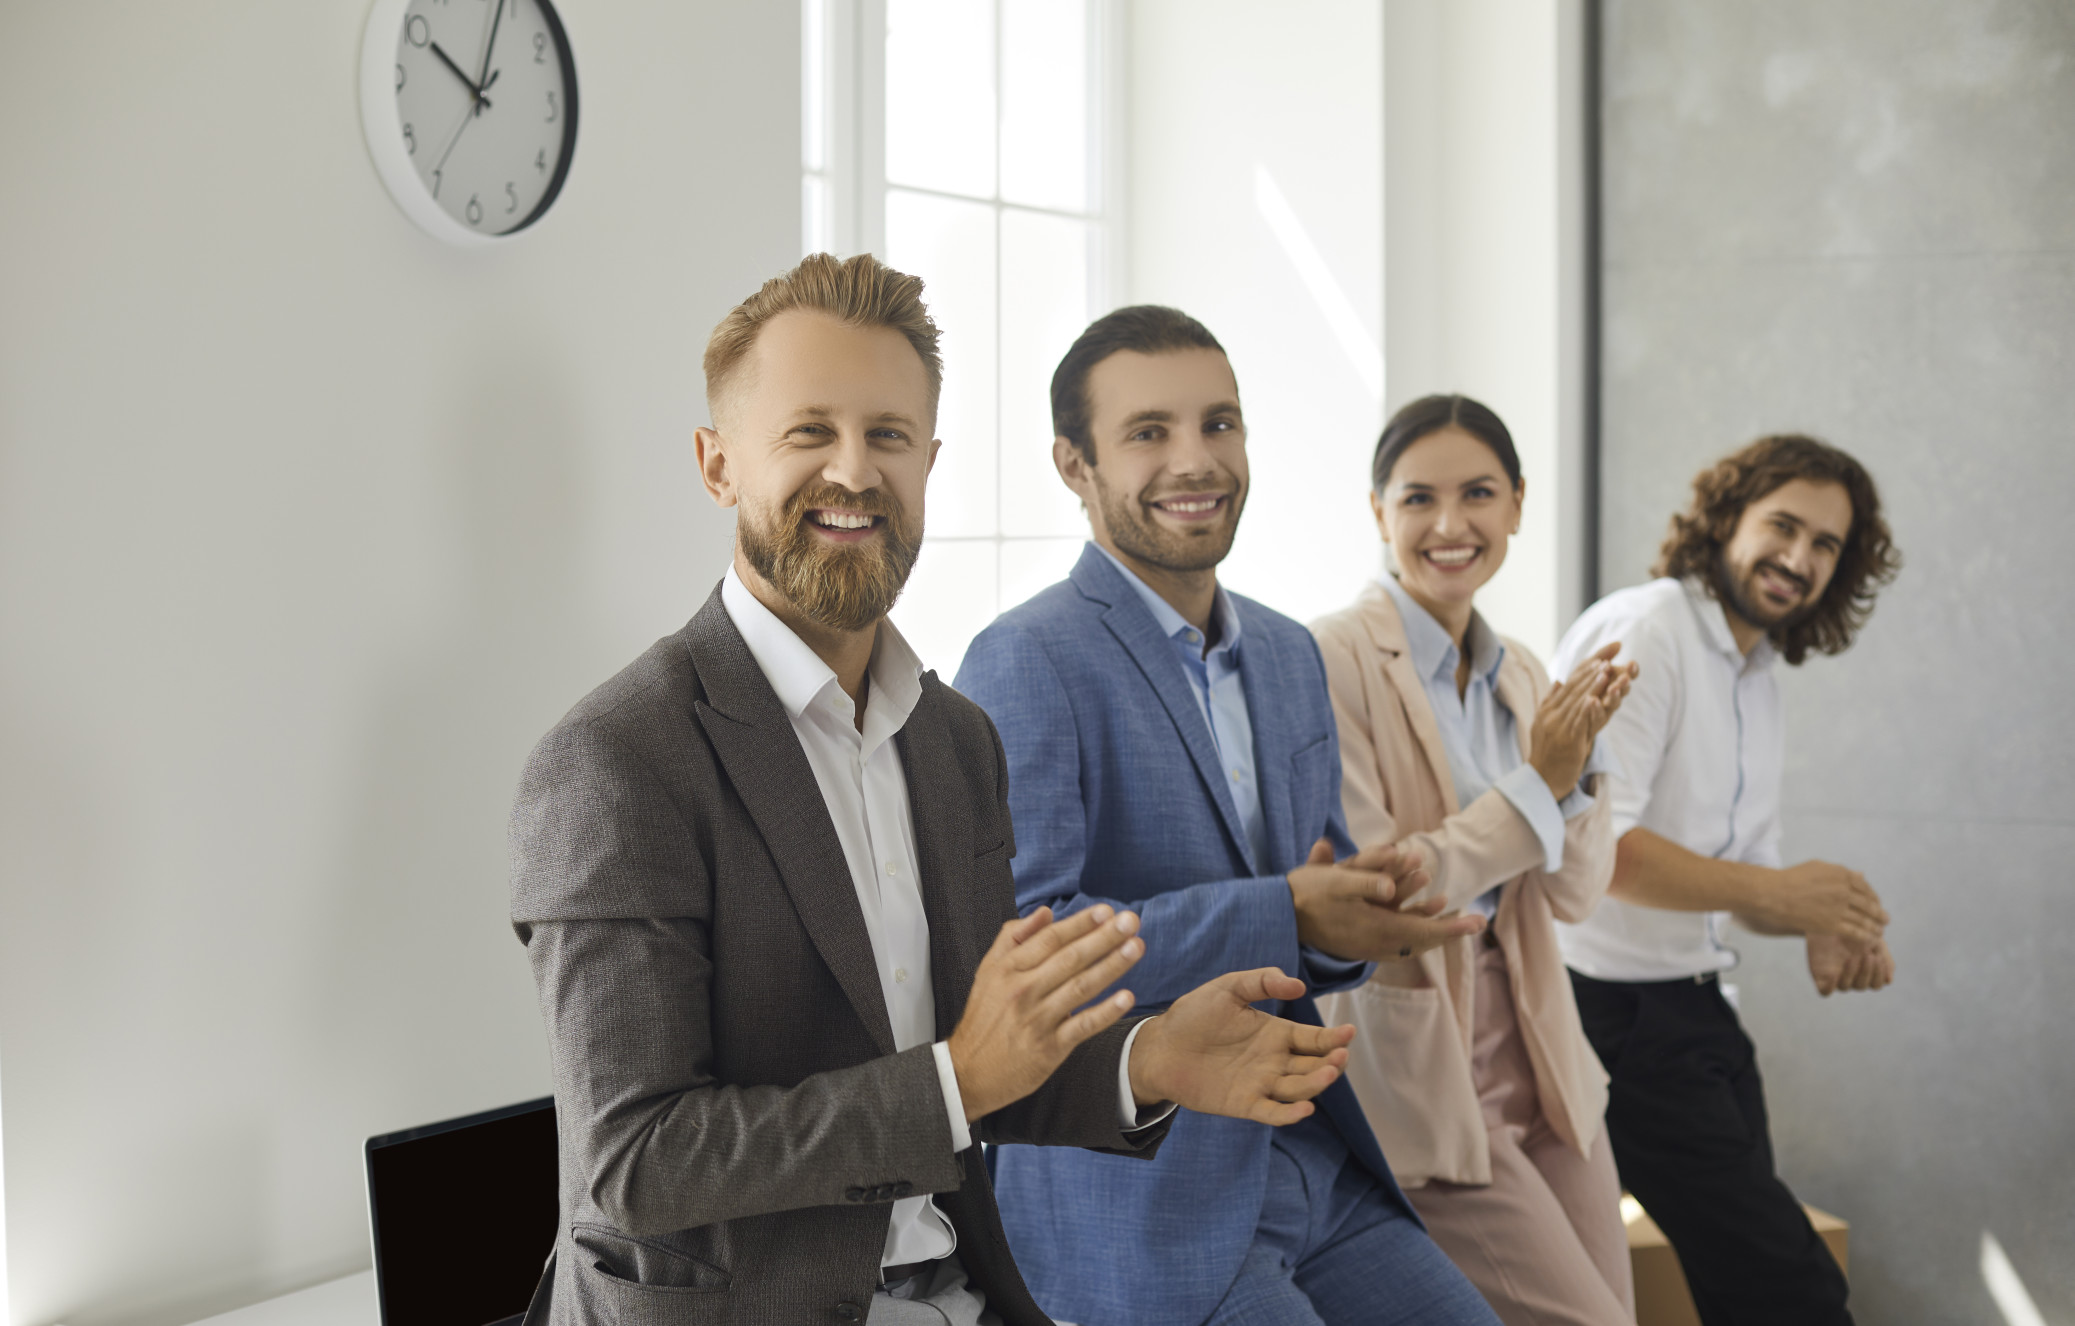 team-of-happy-business-people-standing-in-office-looking-at-camera-smiling-and-clapping-hands_t20_G7Jo6e.jpg